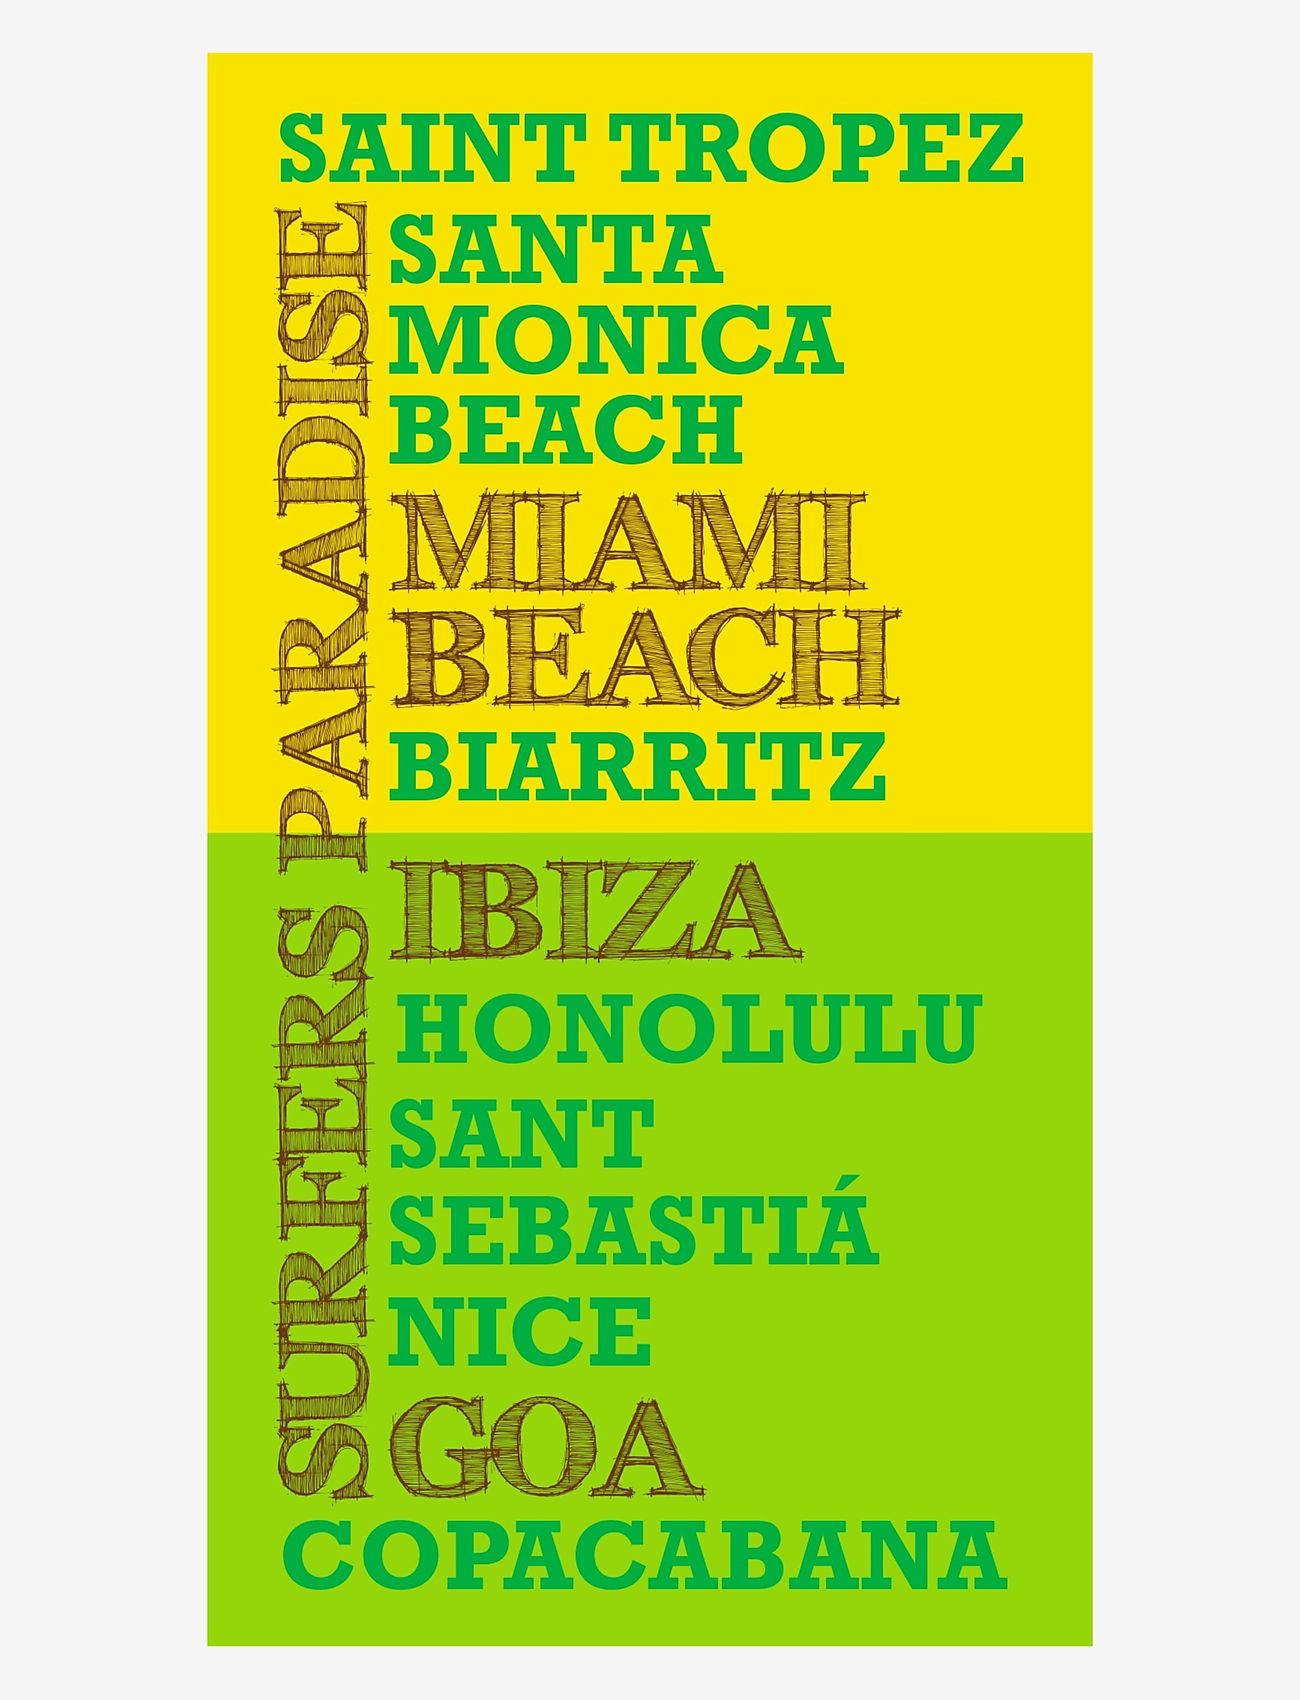 Bercato - Towel printed Surfers Paradise - lowest prices - green, yellow - 0